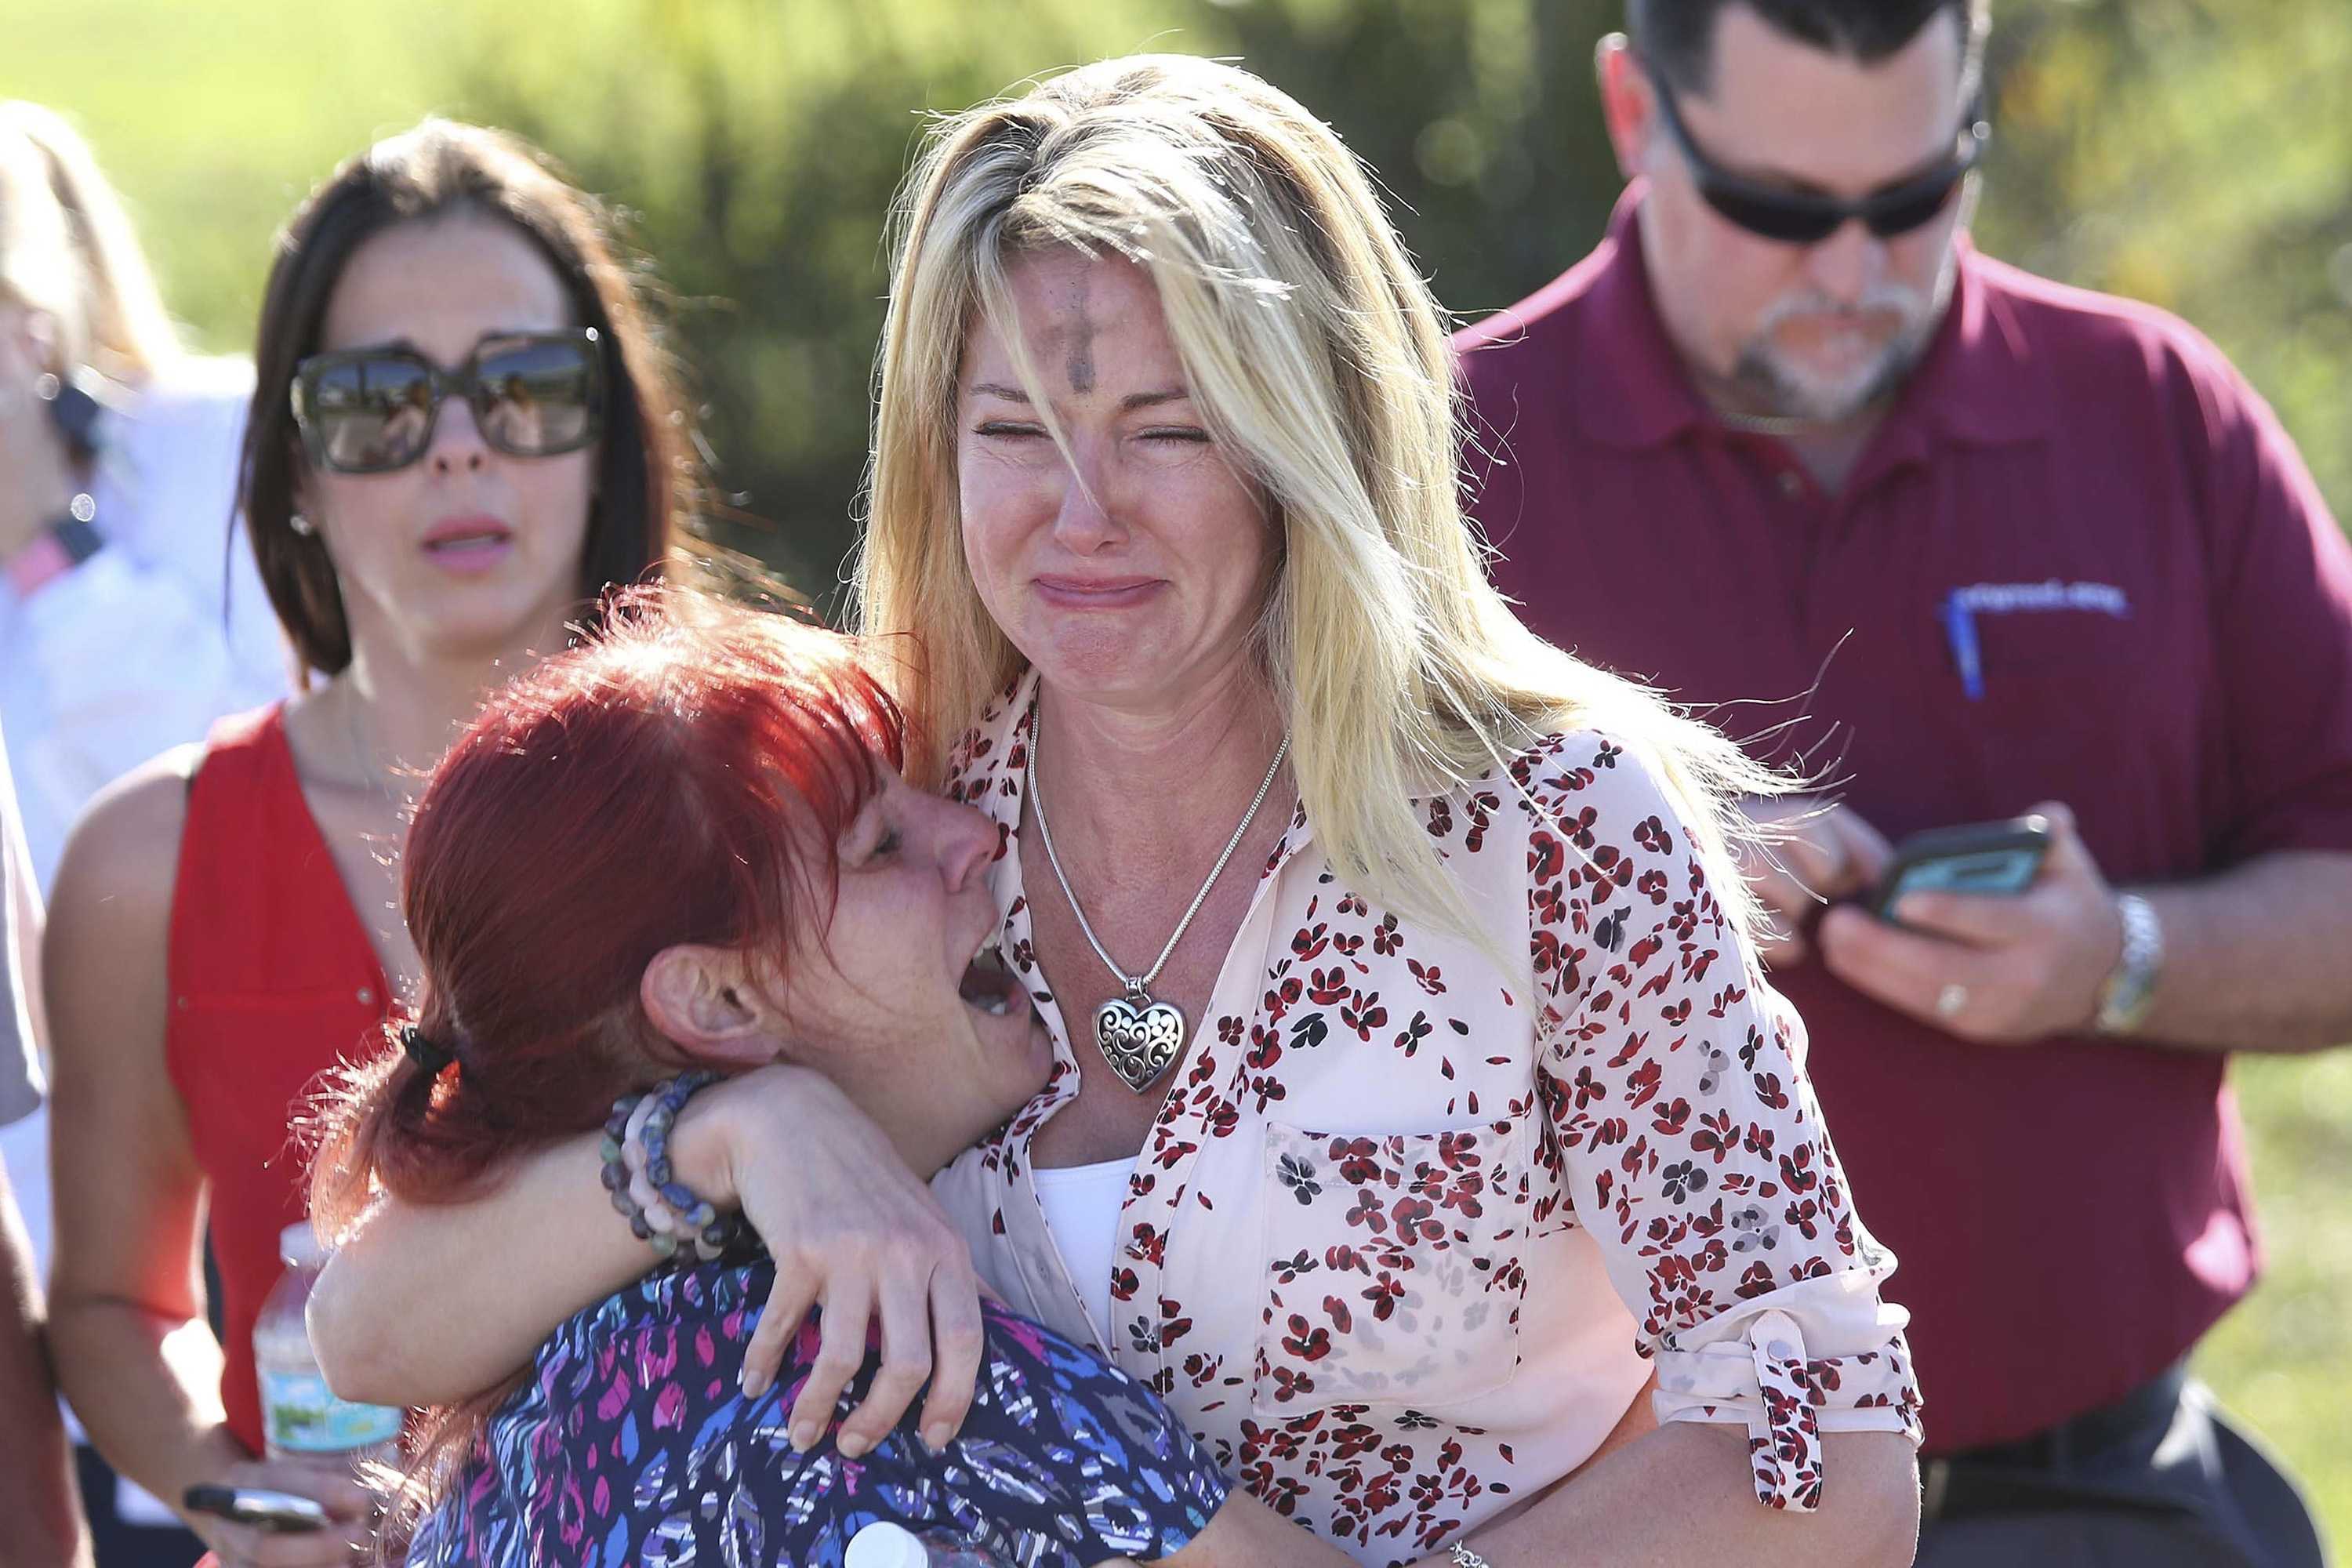 17 killed in Florida school shooting; suspect facing premeditated murder charges